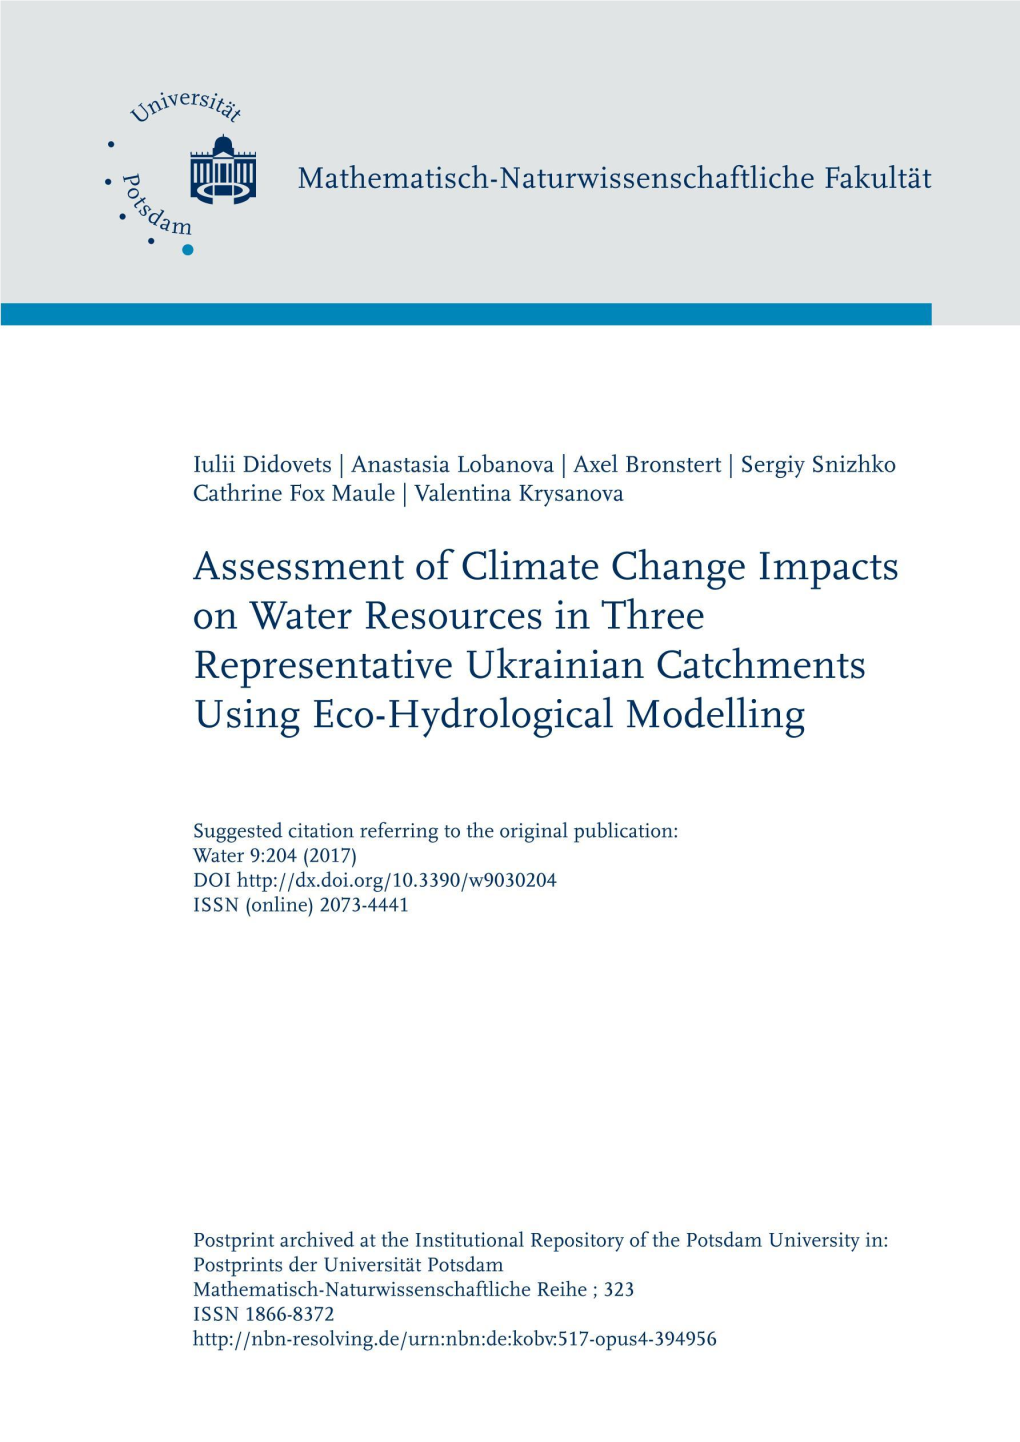 Assessment of Climate Change Impacts on Water Resources in Three Representative Ukrainian Catchments Using Eco-Hydrological Modelling